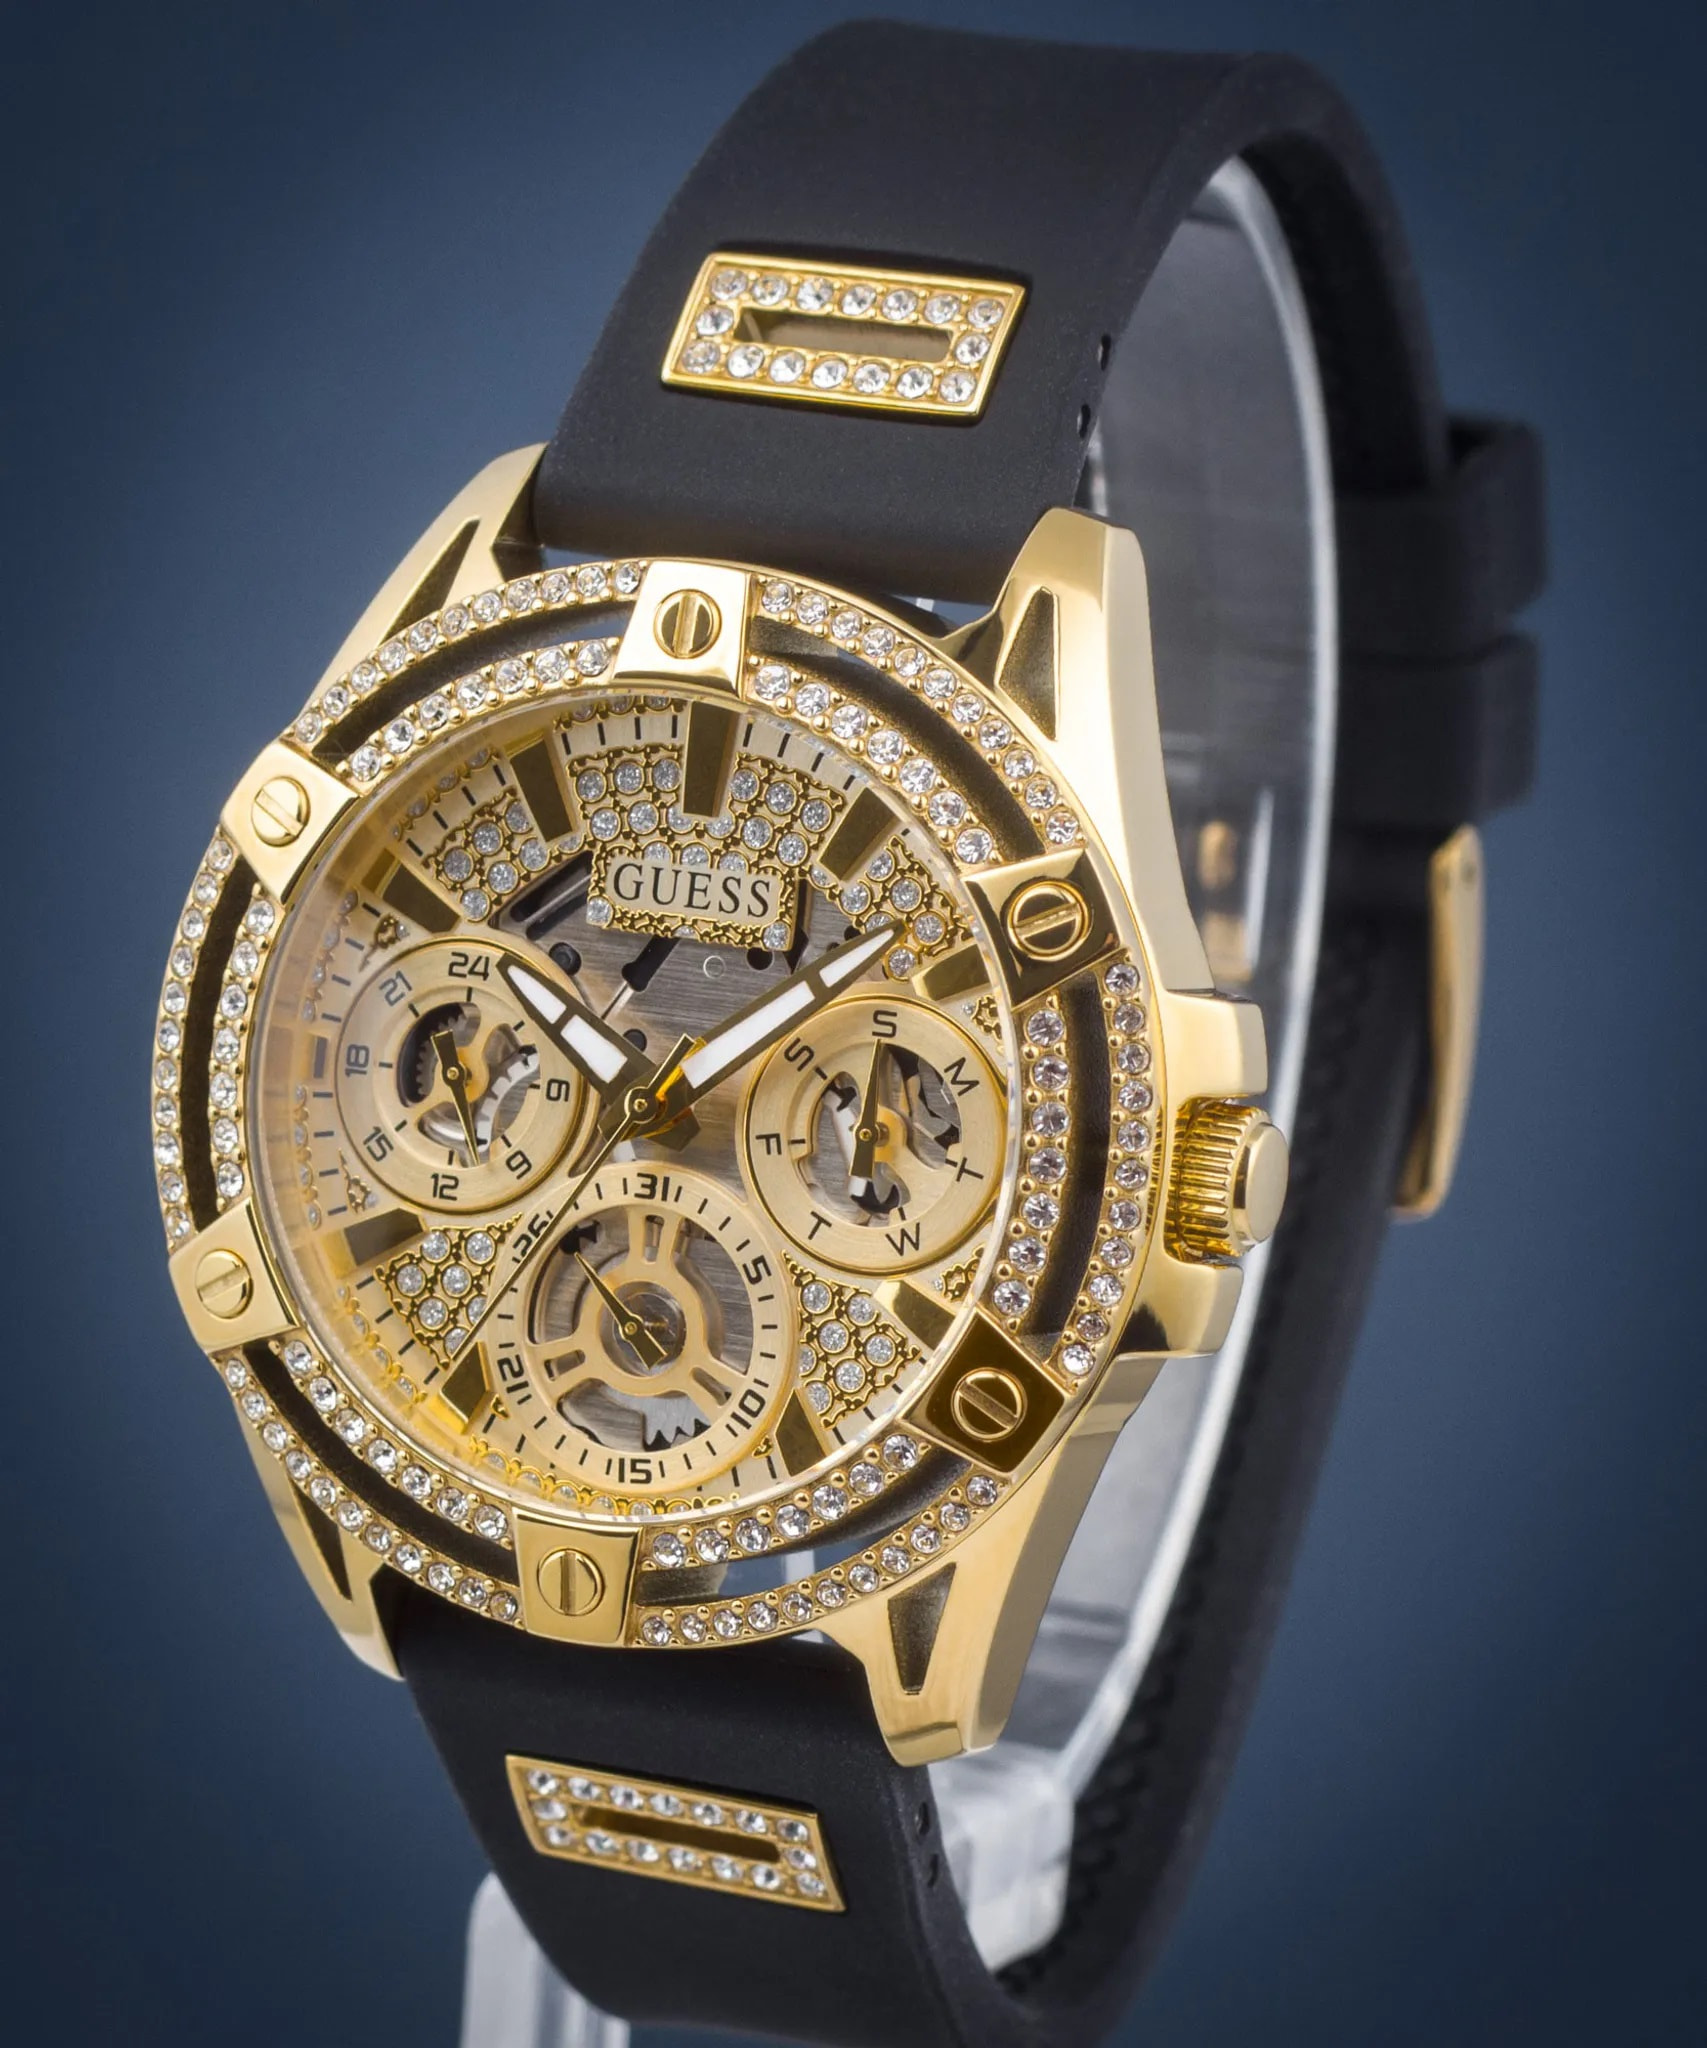 ĐỒNG HỒ GUESS GOLD-TONE MULTI-FUNCTION BLACK SILICONE WATCH GW0536L3 10